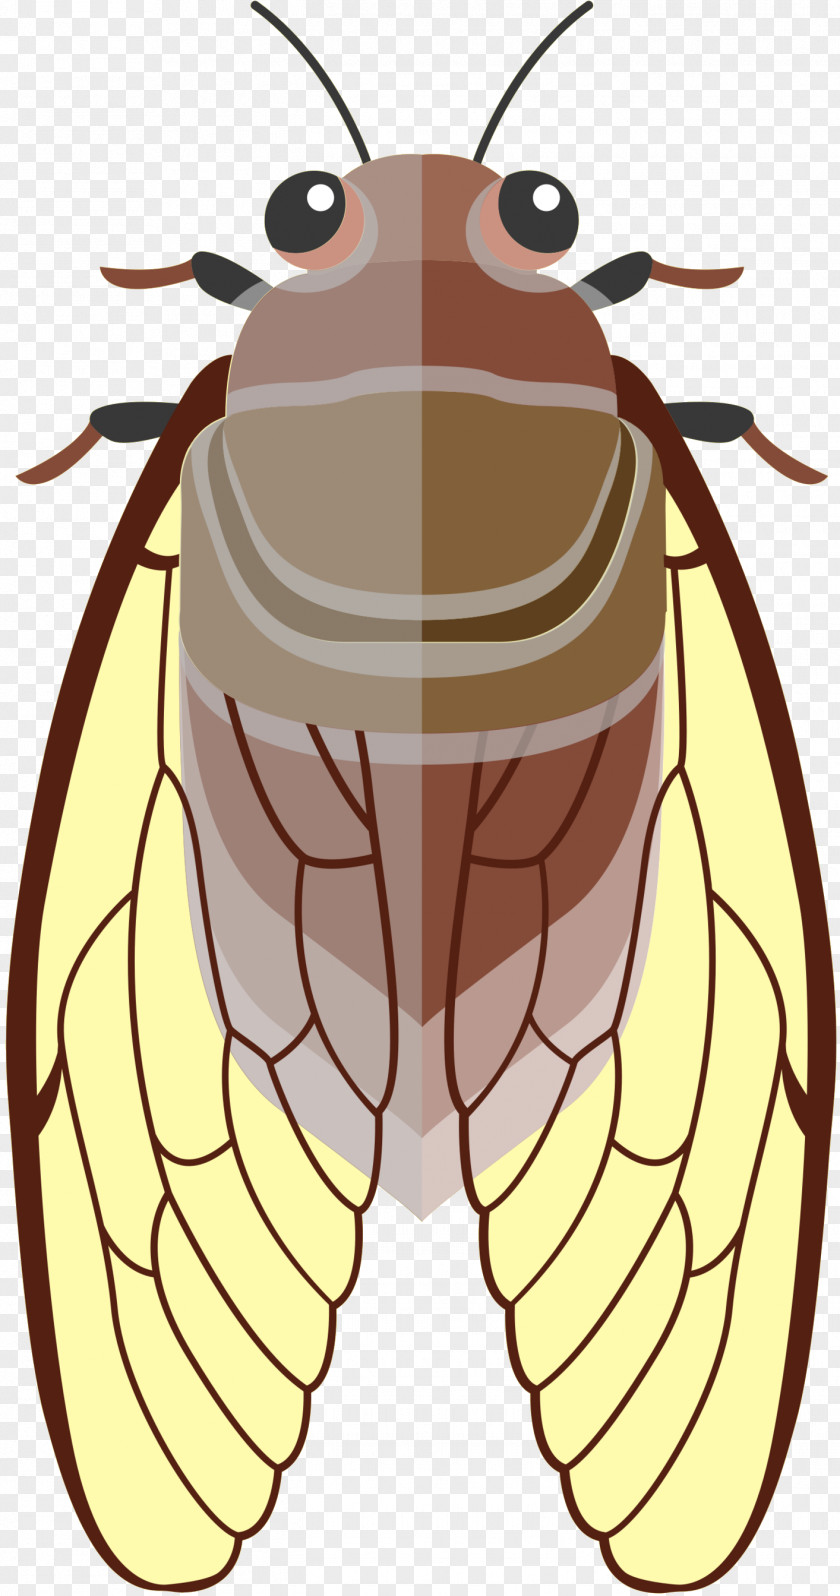 Honey Bee Clip Art Illustration Insect PNG